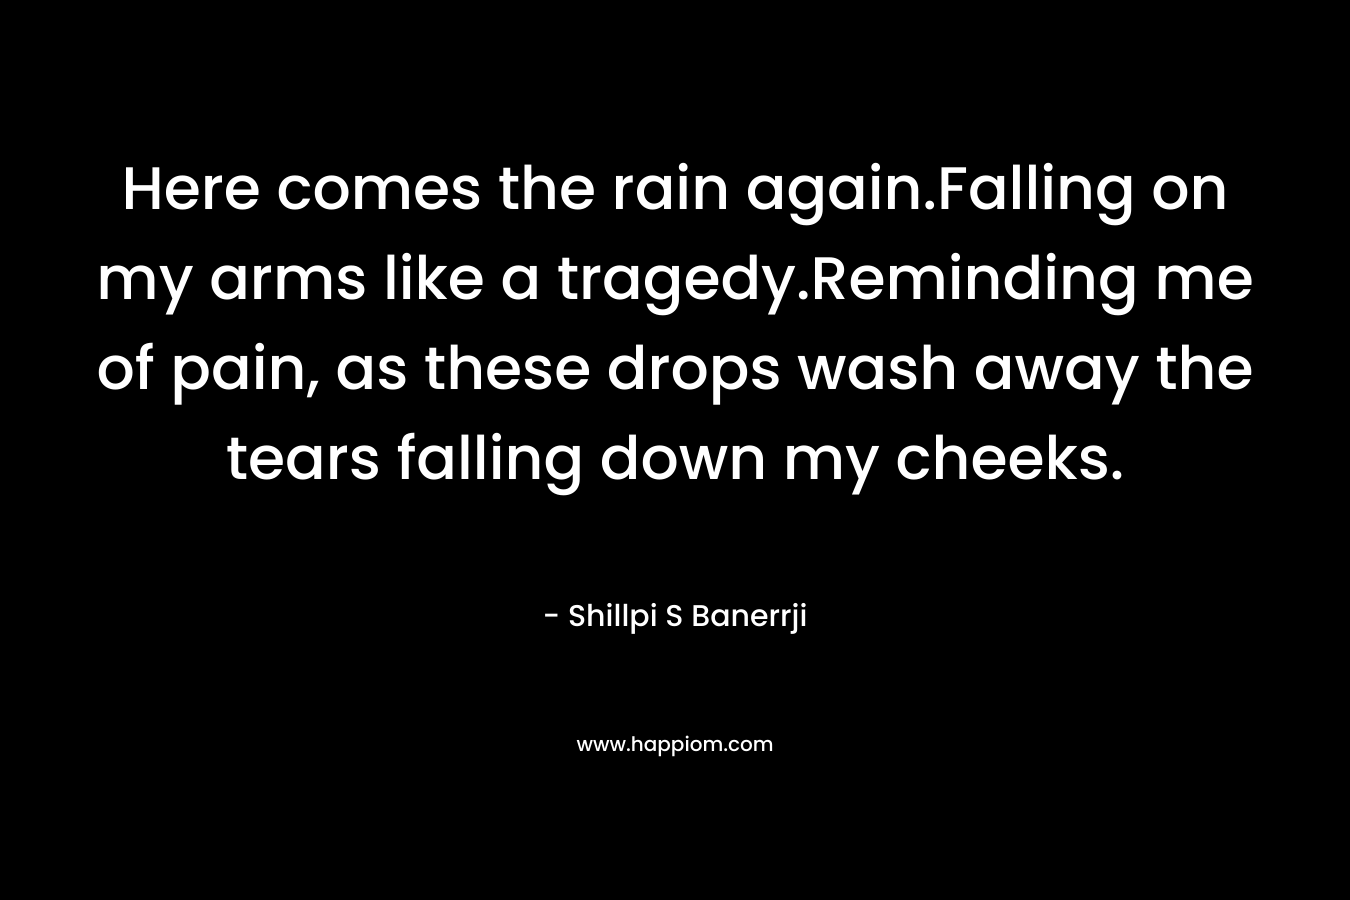 Here comes the rain again.Falling on my arms like a tragedy.Reminding me of pain, as these drops wash away the tears falling down my cheeks. – Shillpi S Banerrji